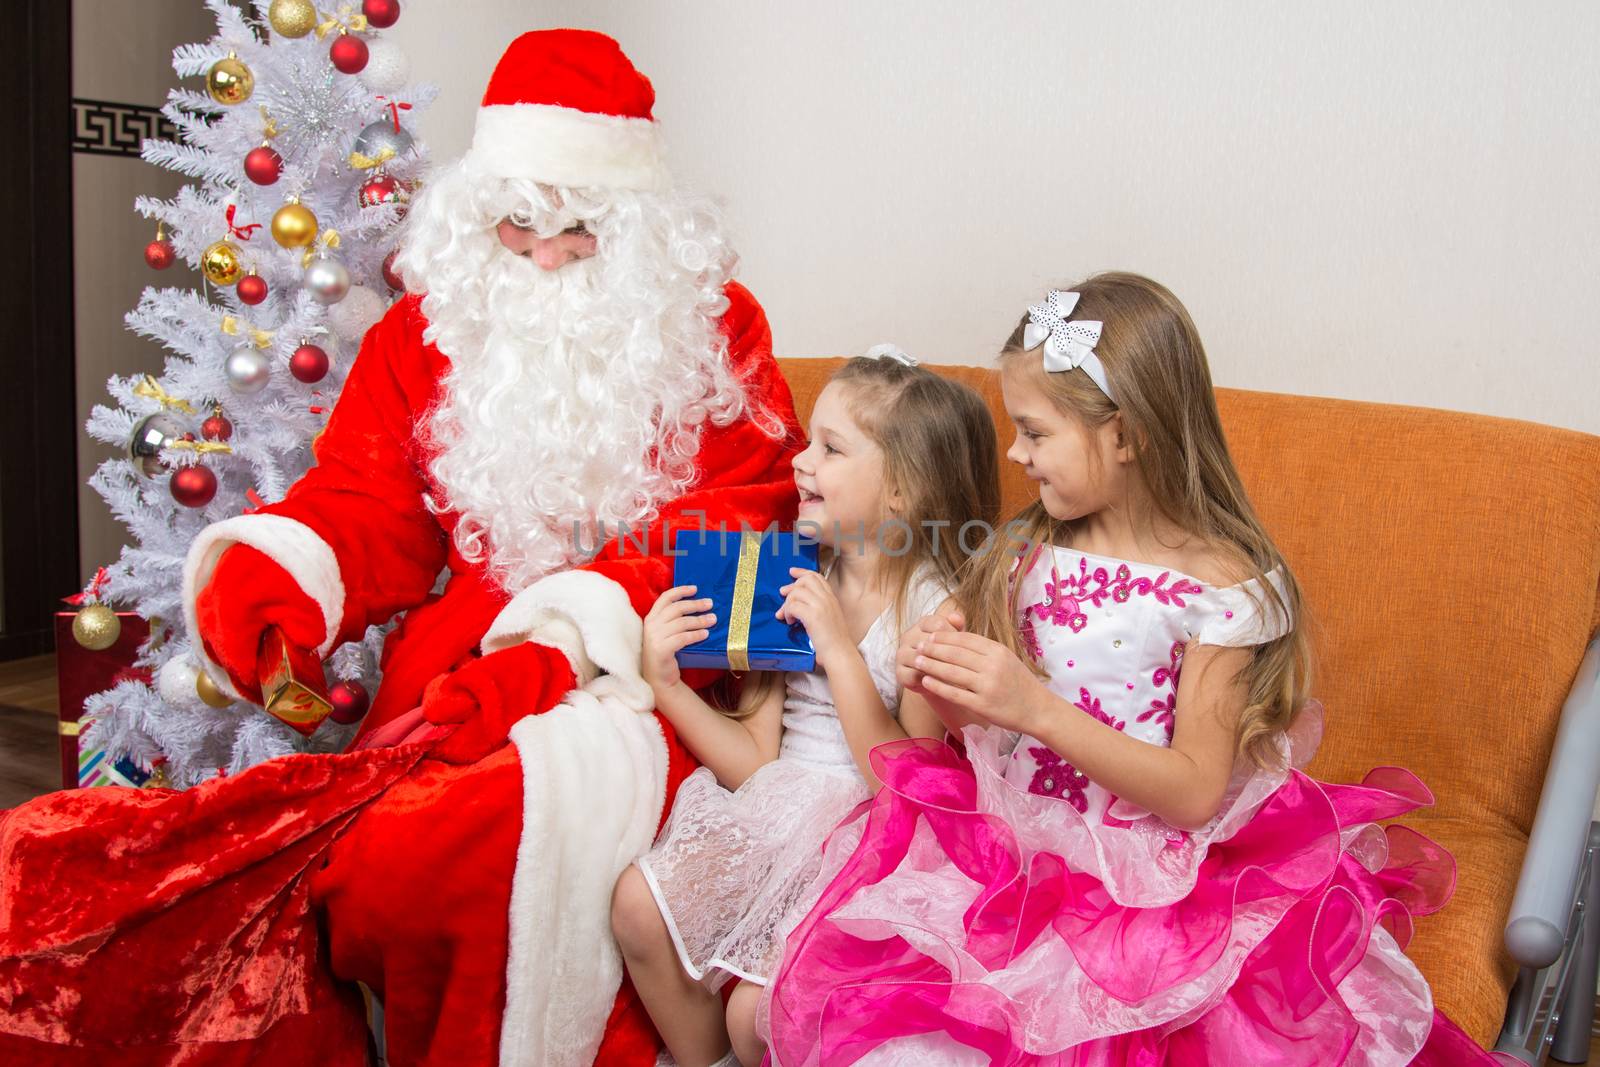 Santa Claus gets gifts from the bag and gives children